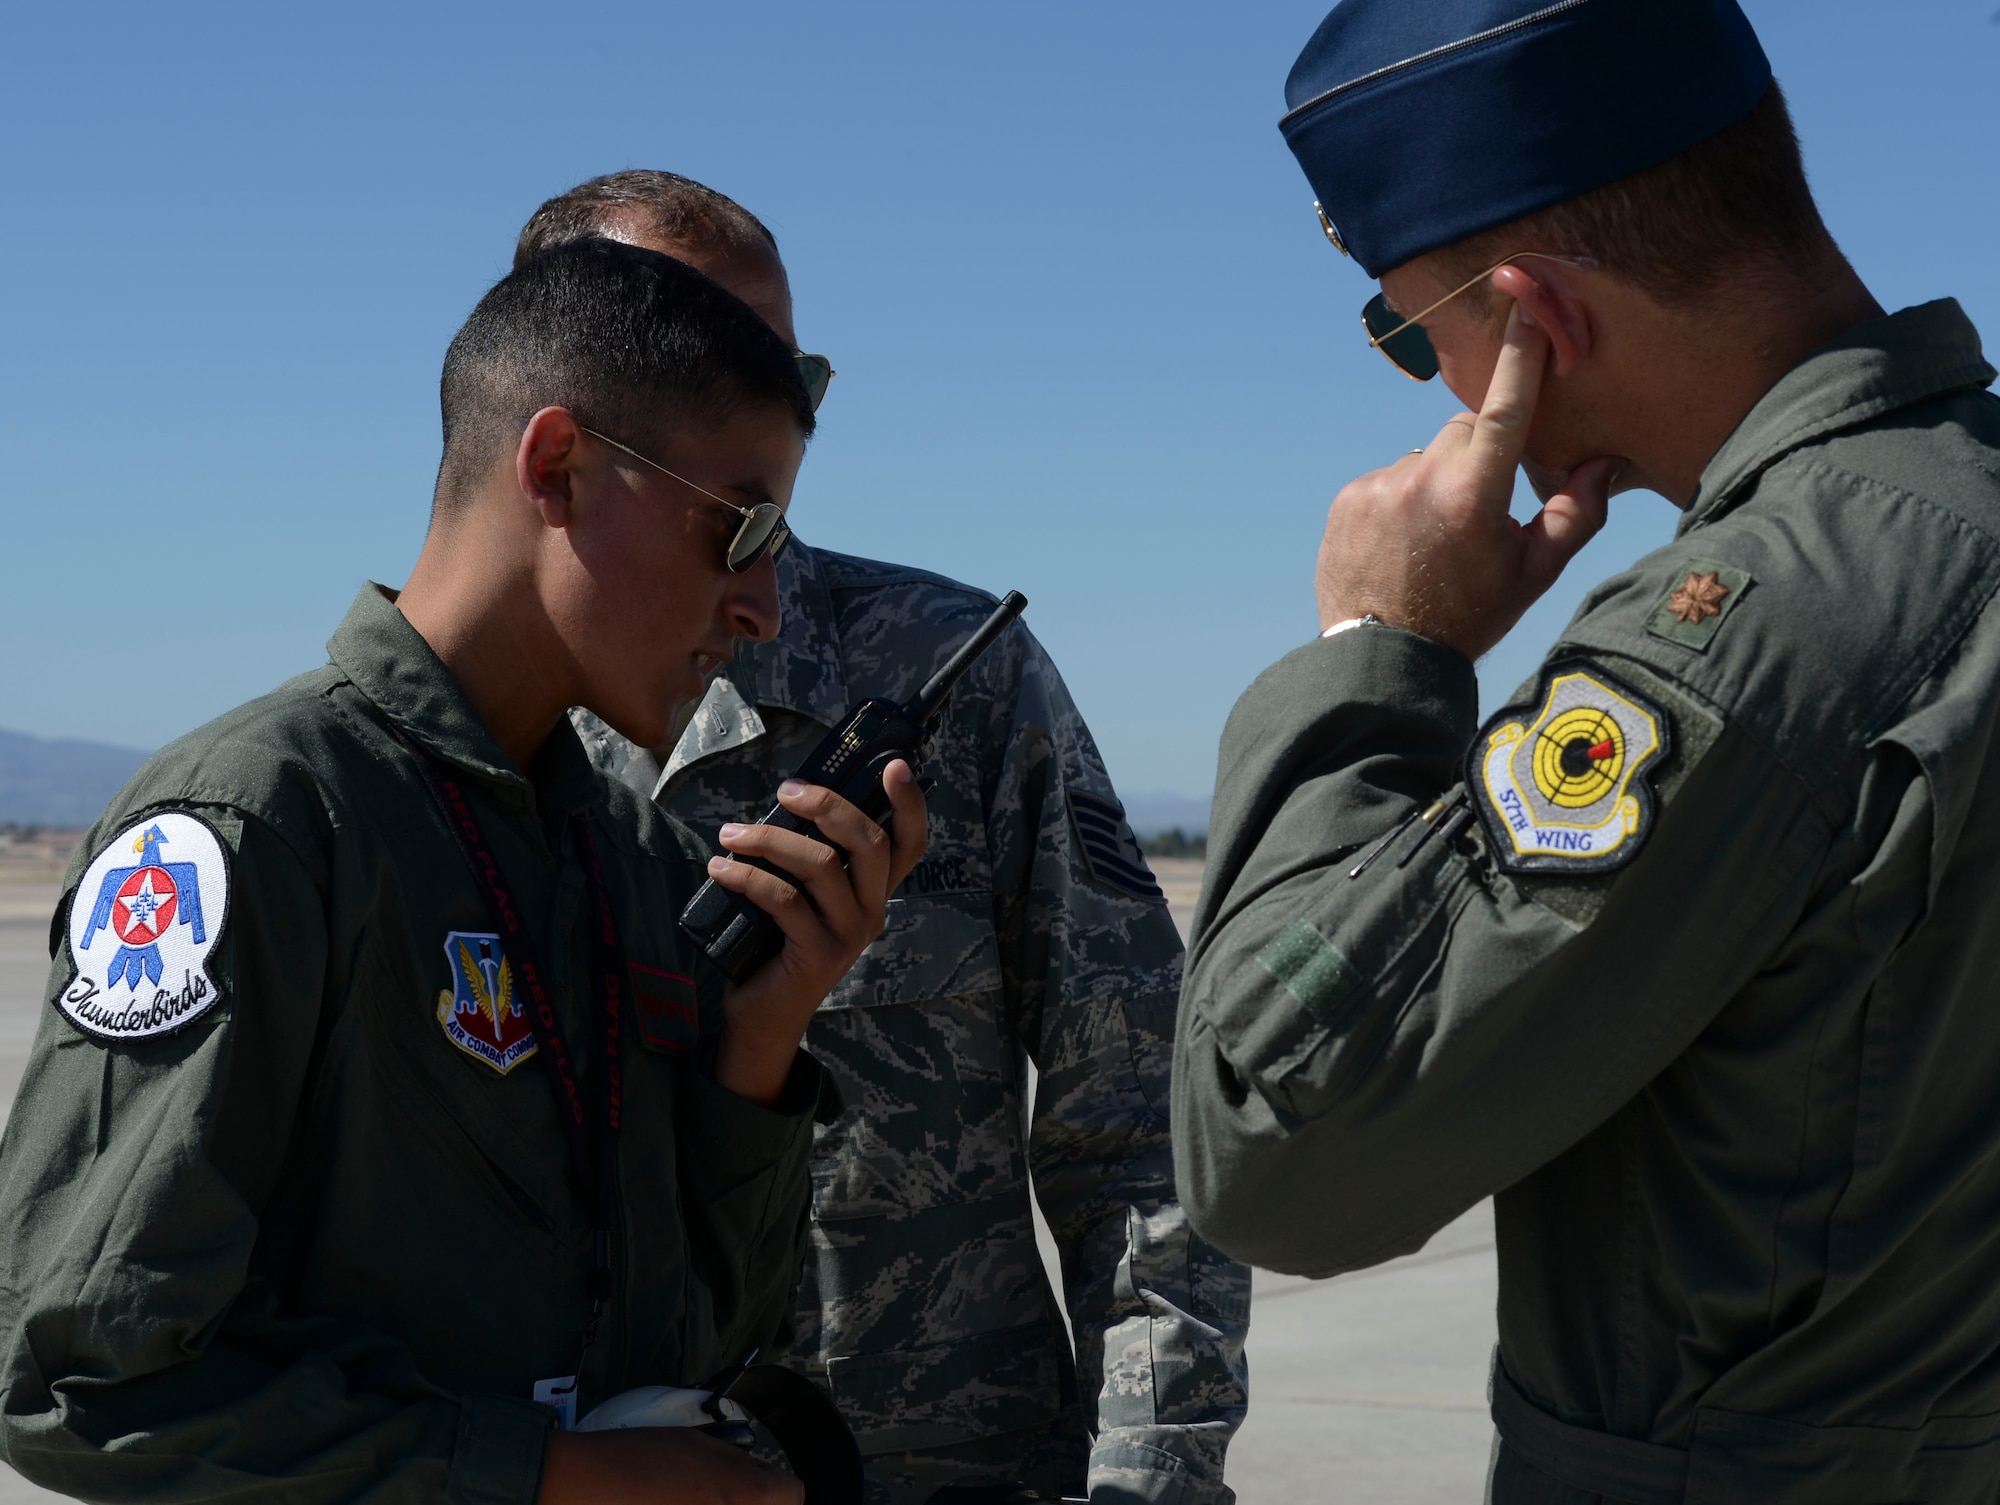 U.S. Air Force Air Demonstration Squadron pilots do a shout-out to Reymond over the radio during their sortie at Nellis Air Force Base, Nev., July 19, 2016. In addition to the shout-out, Reymond’s name was placed on the number two jet. (U.S. Air Force photo by Senior Airman Tabatha McCarthy)